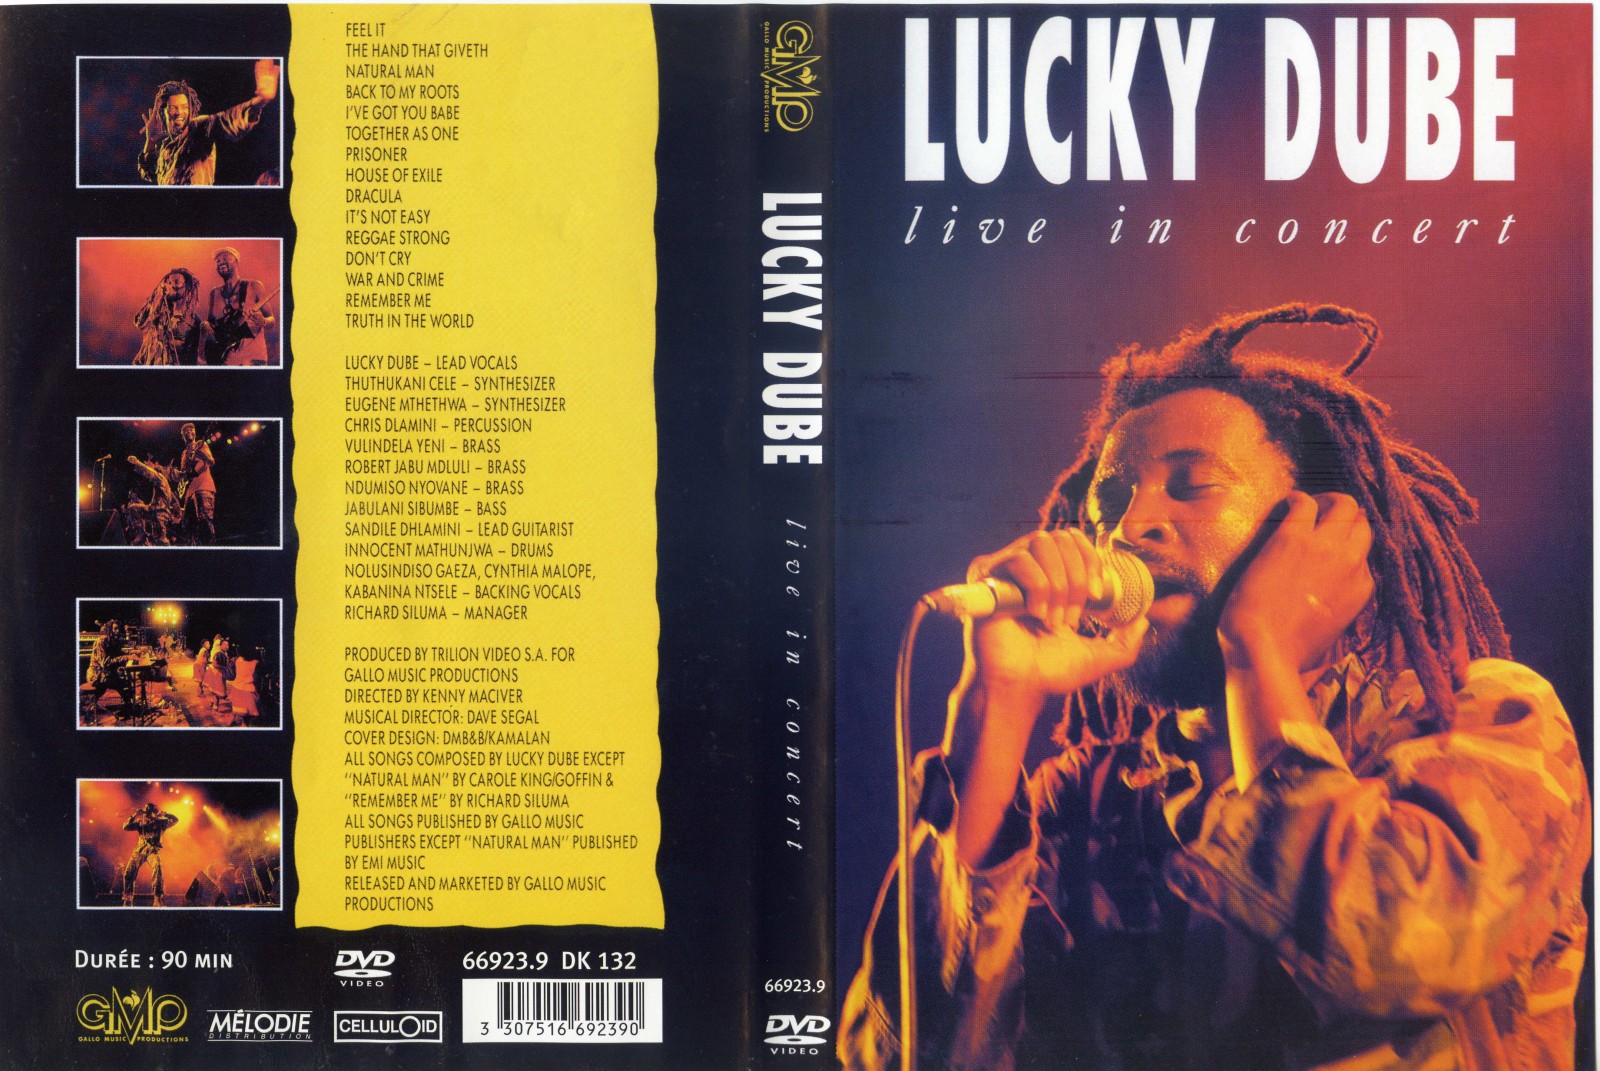 Jaquette DVD Lucky Dube - Live in concert